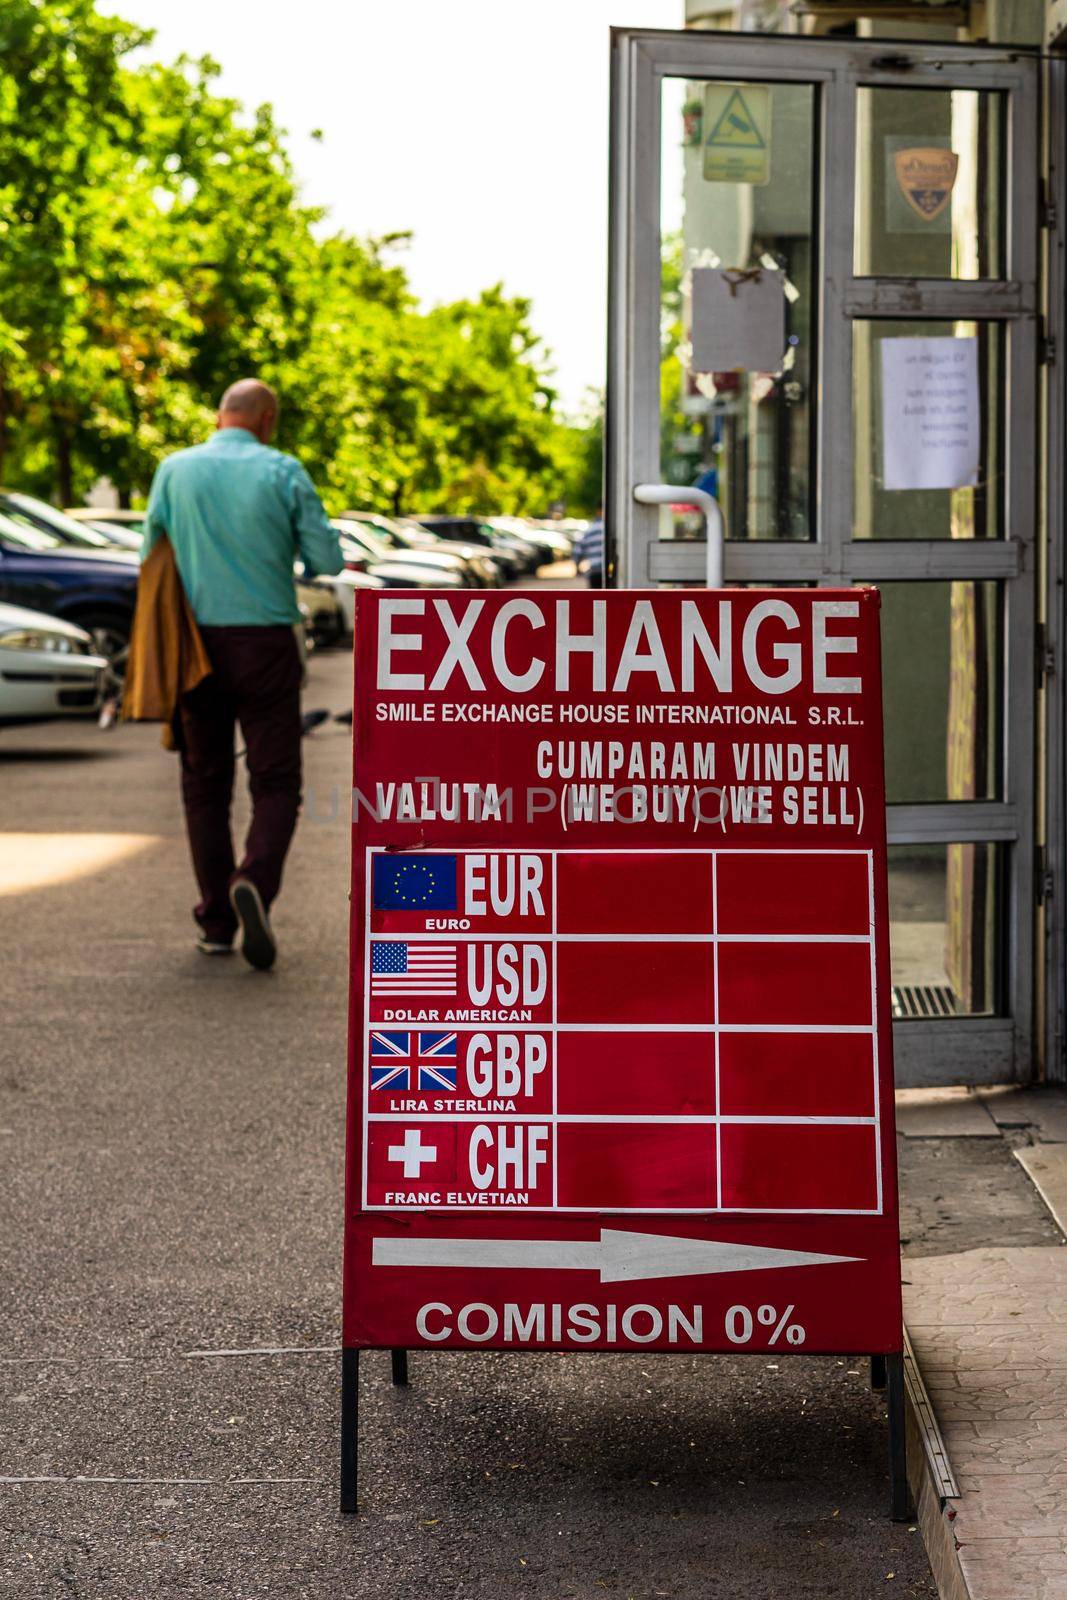 The exchange rate of the main currencies is displayed on a red board at the entrance of a currency exchange office in Bucharest, Romania, 2020 by vladispas